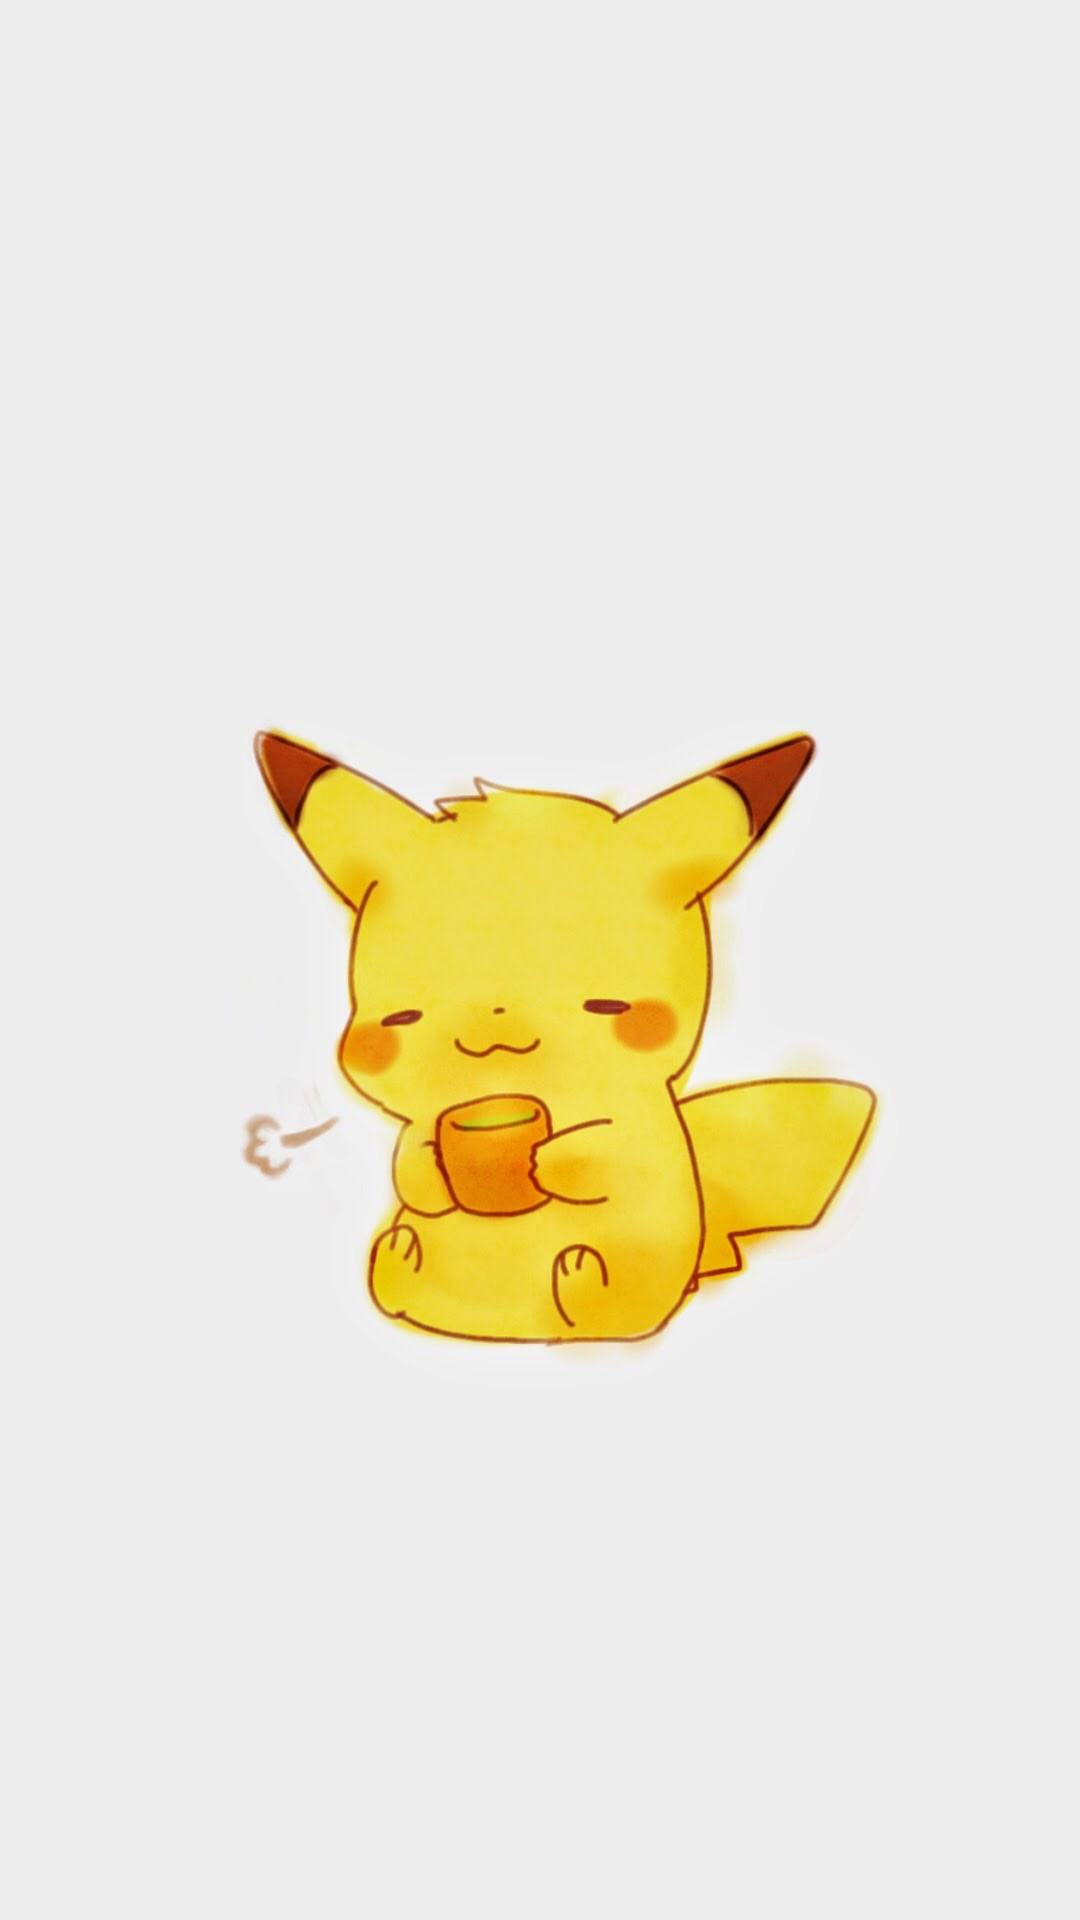 Tap image for more funny cute Pikachu wallpaper! Pikachu – @mobile9 |  Wallpapers for